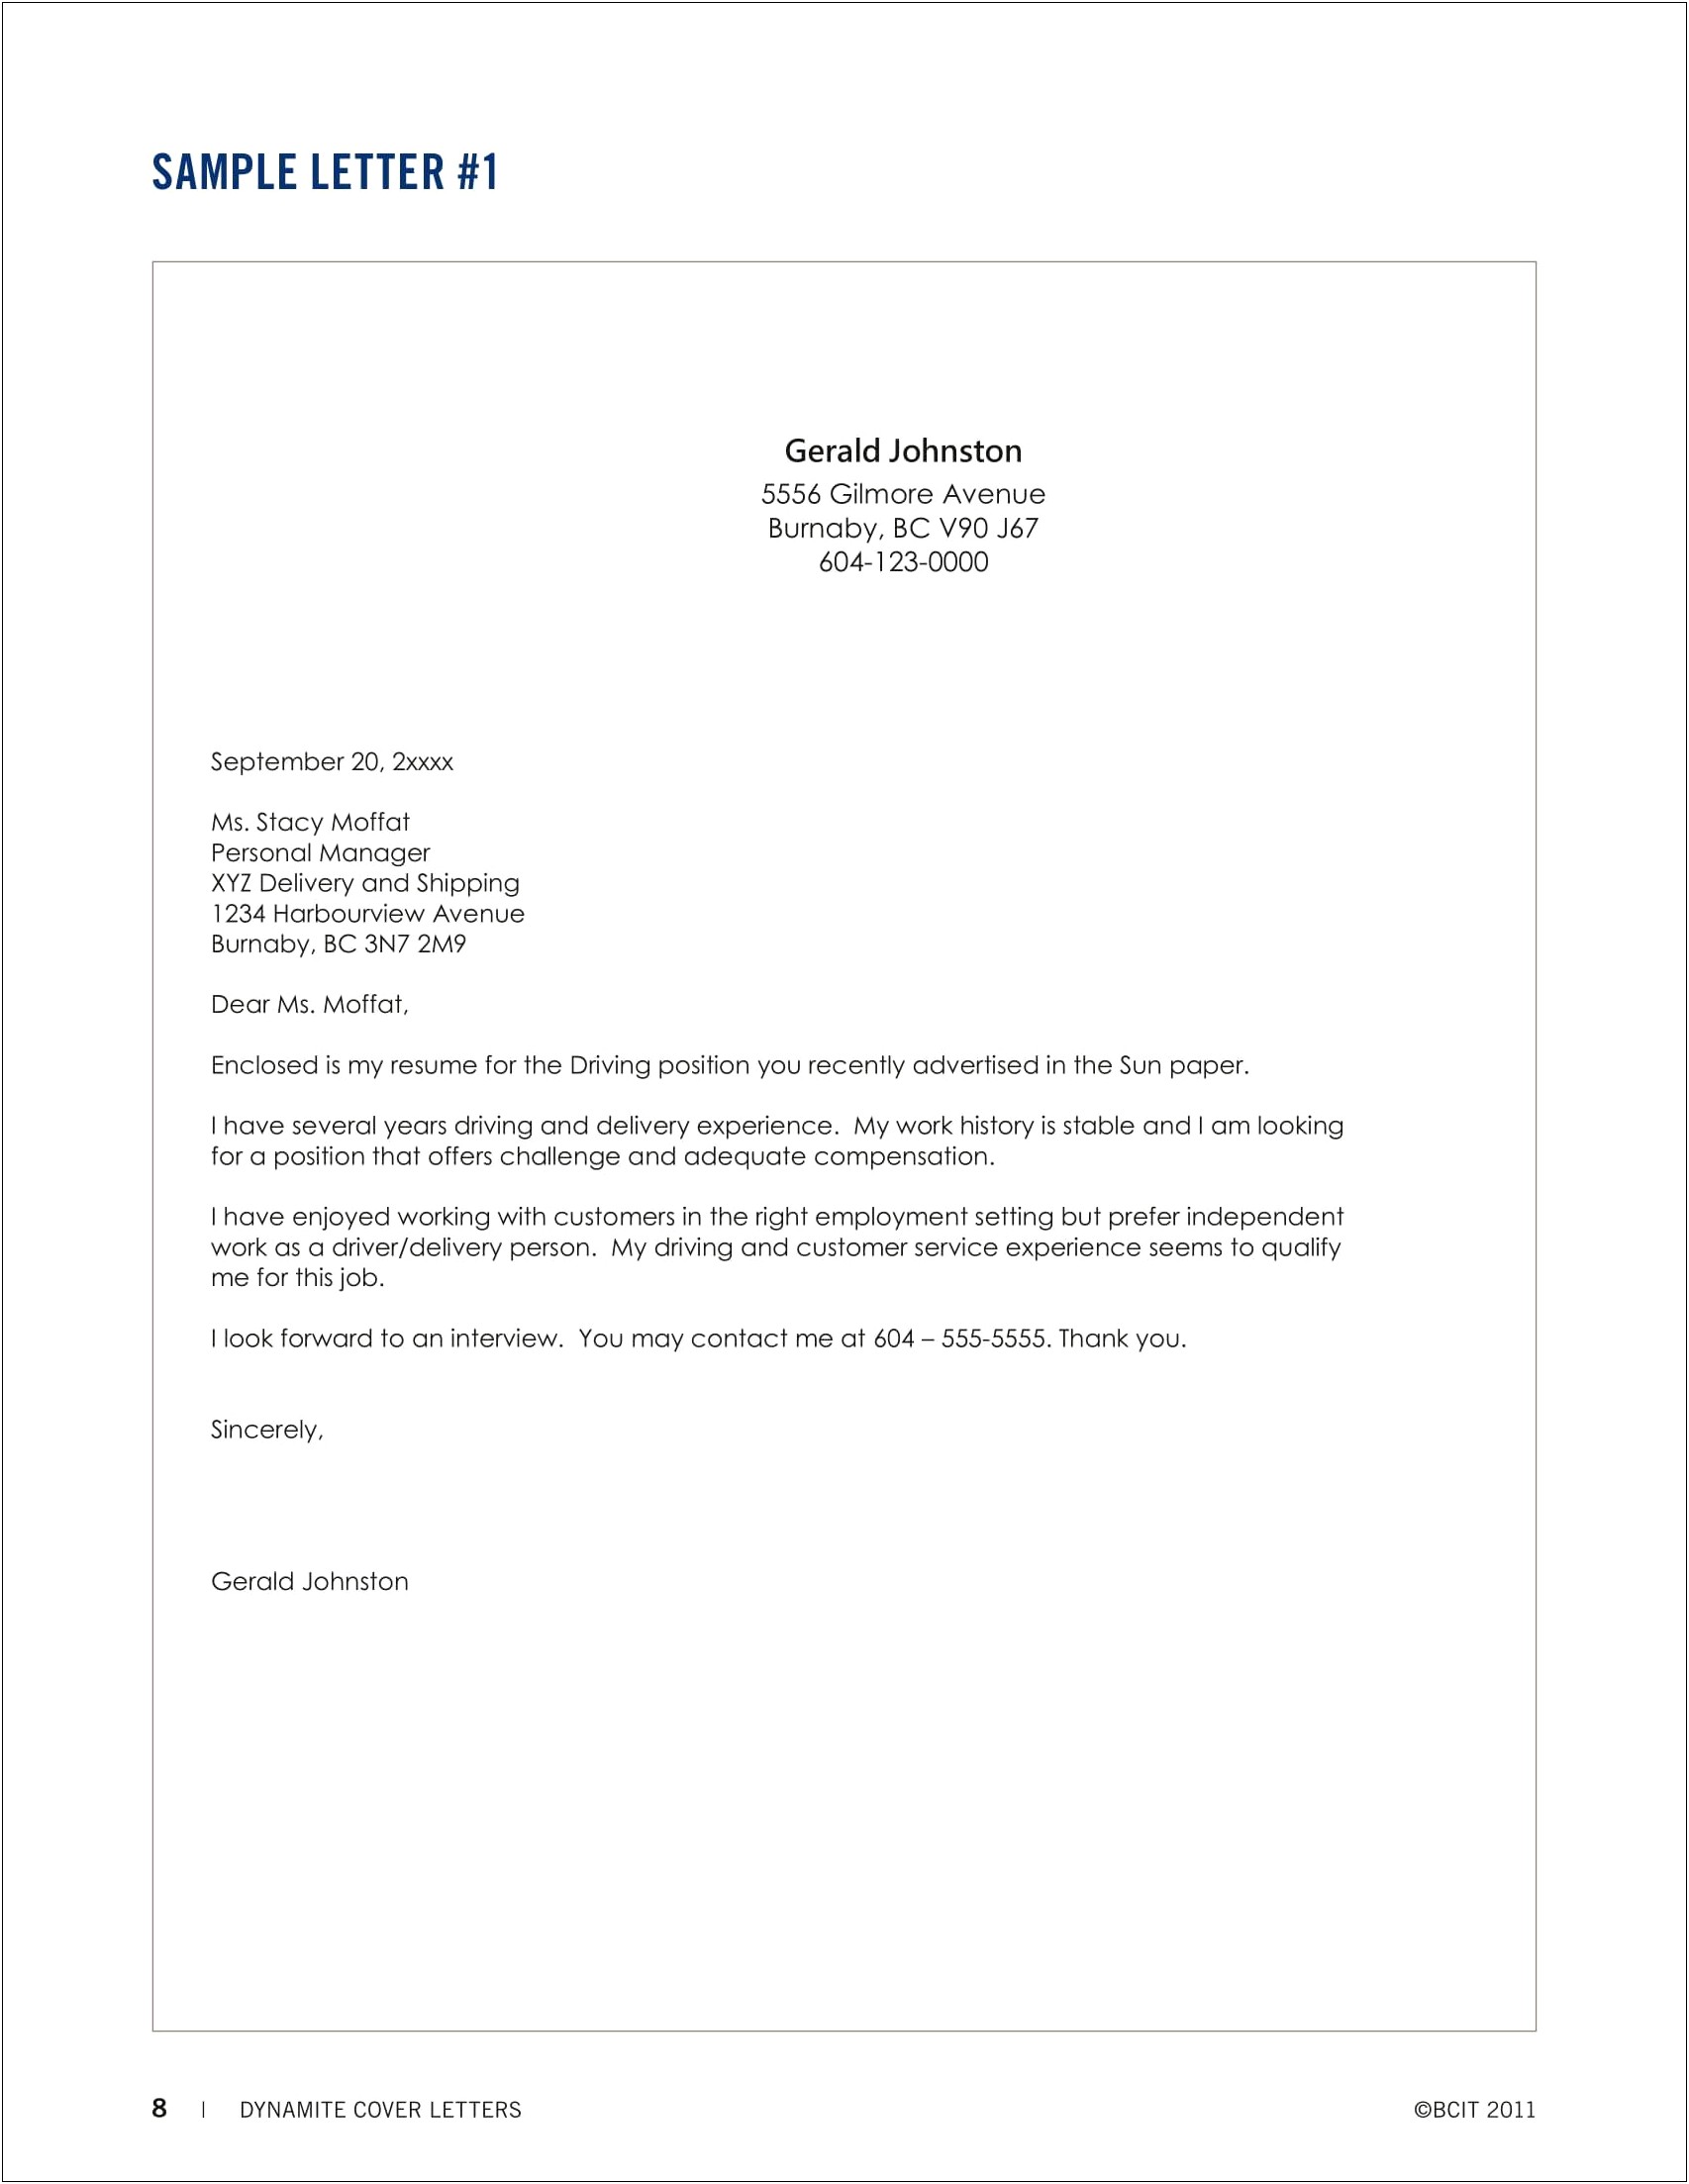 Resume With Cover Letter Format Pdf